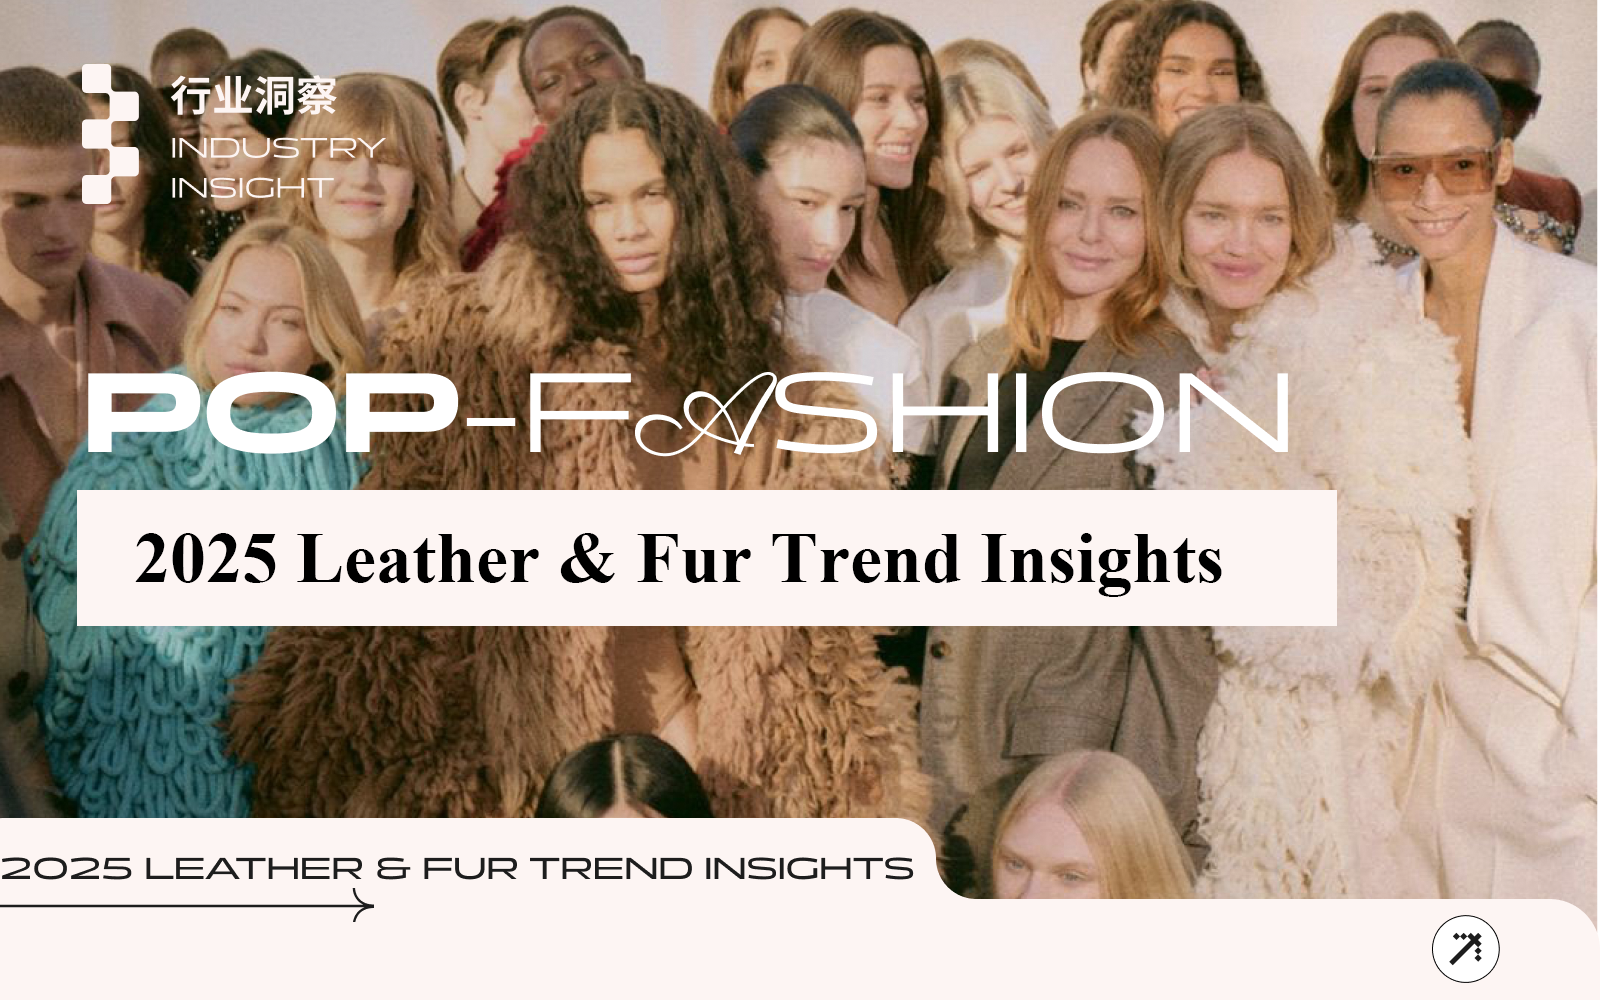 S/S 2025 Leather & Fur Industry Insight